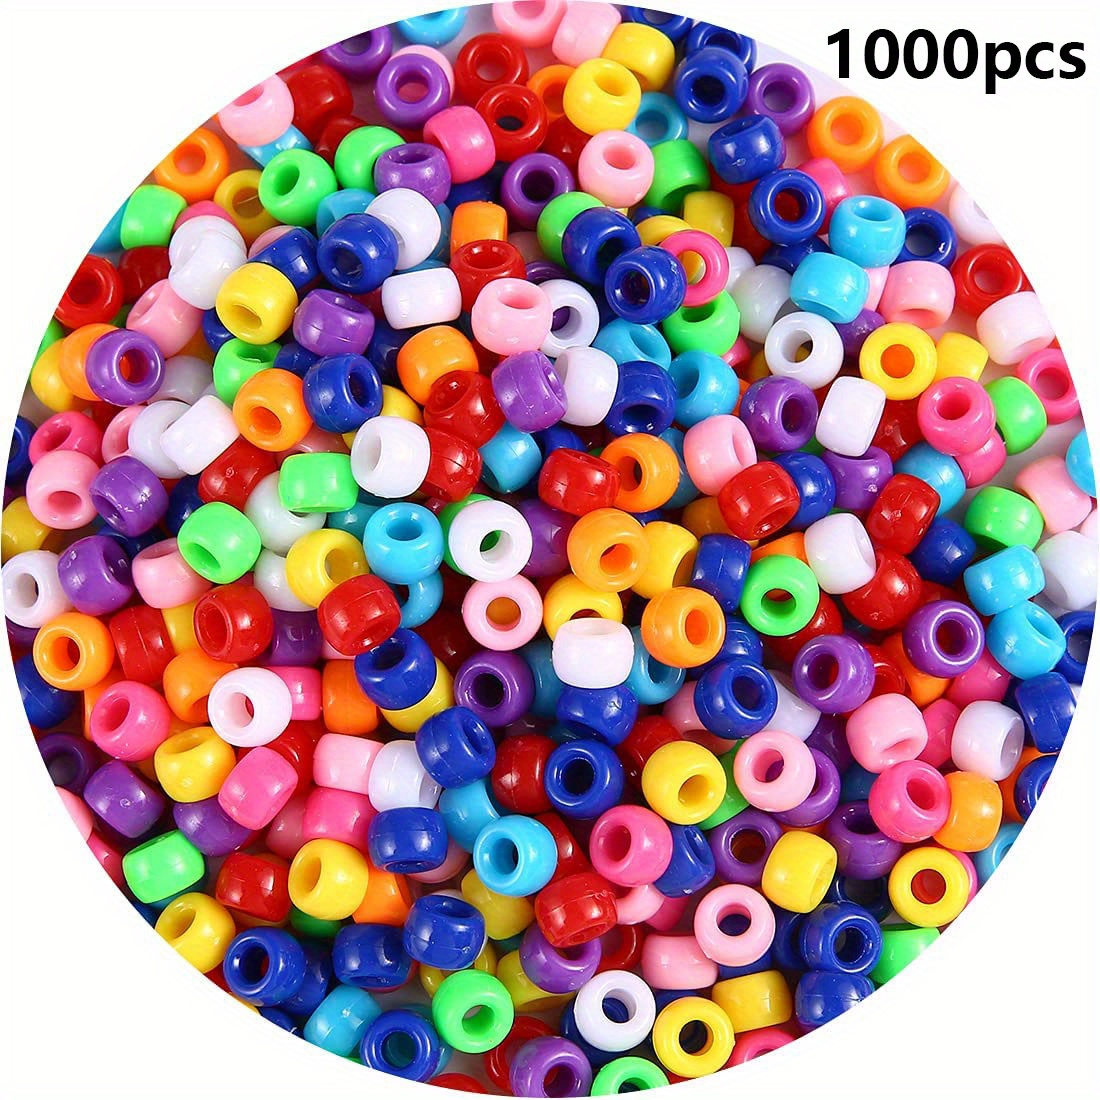 Bright Opaque Multicolor Mix Plastic Pony Beads 6 x 9mm, 500 beads